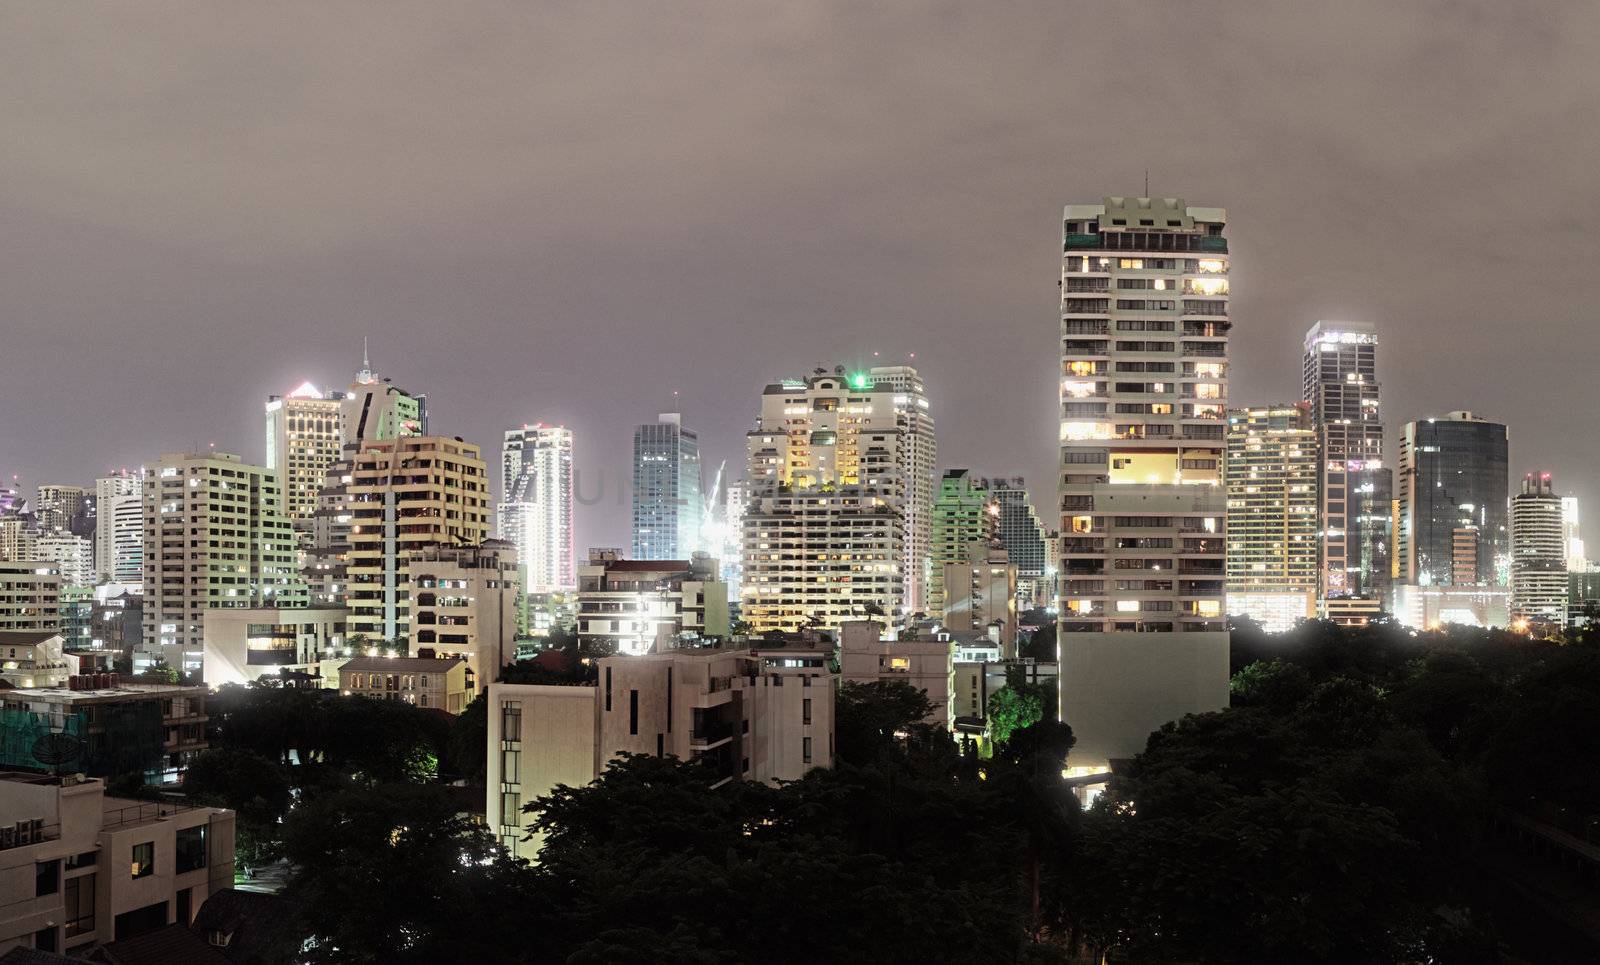 Modern architecture in Bangkok - high-rise buildings in the city center